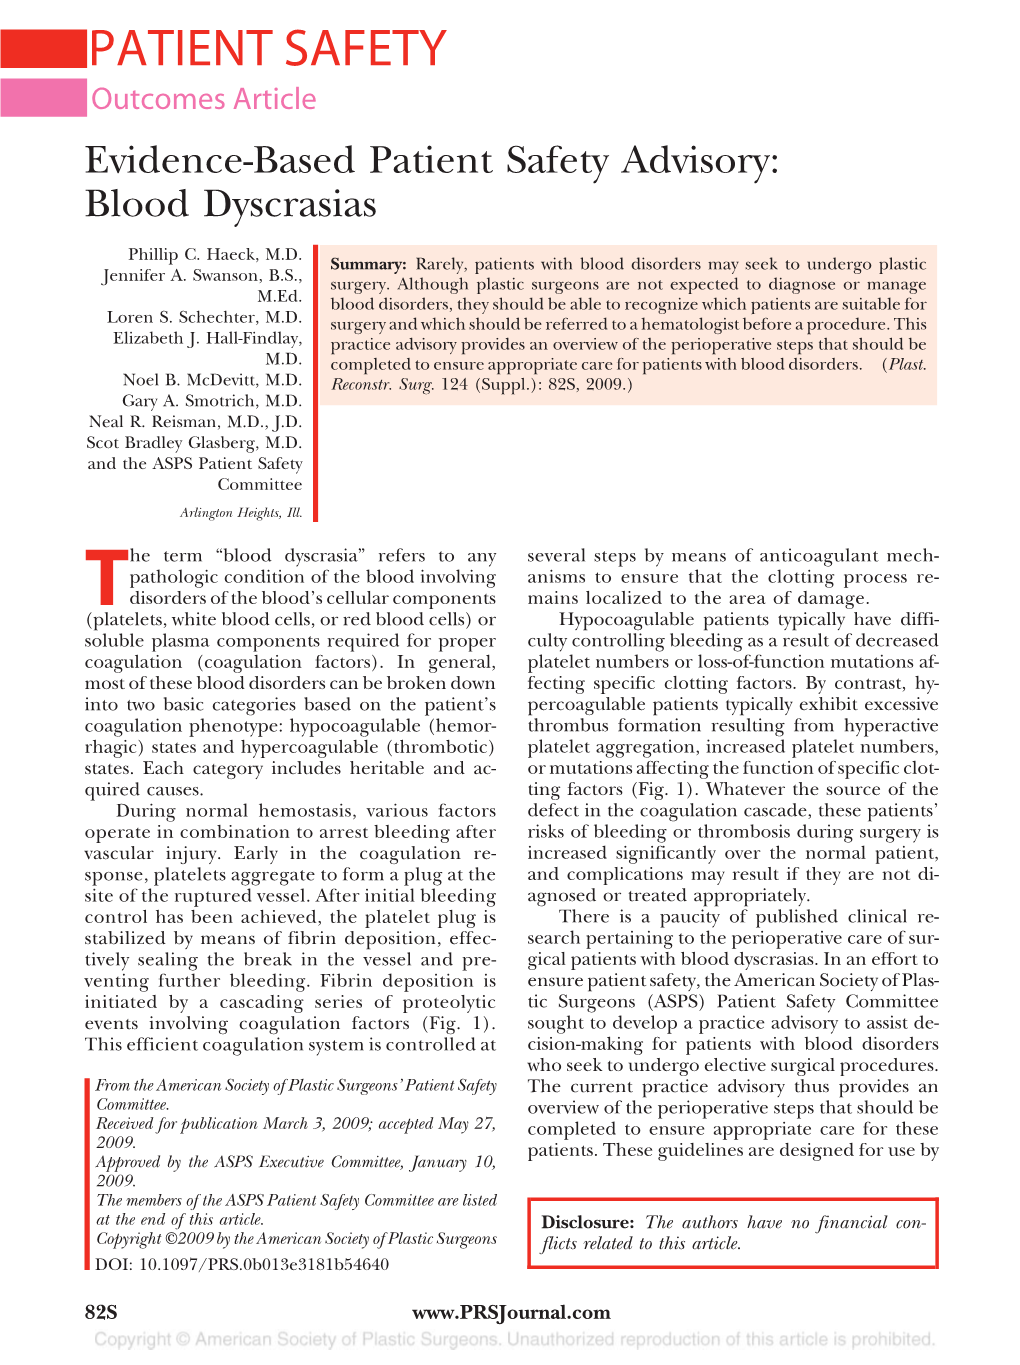 Evidence-Based Patient Safety Advisory: Blood Dyscrasias